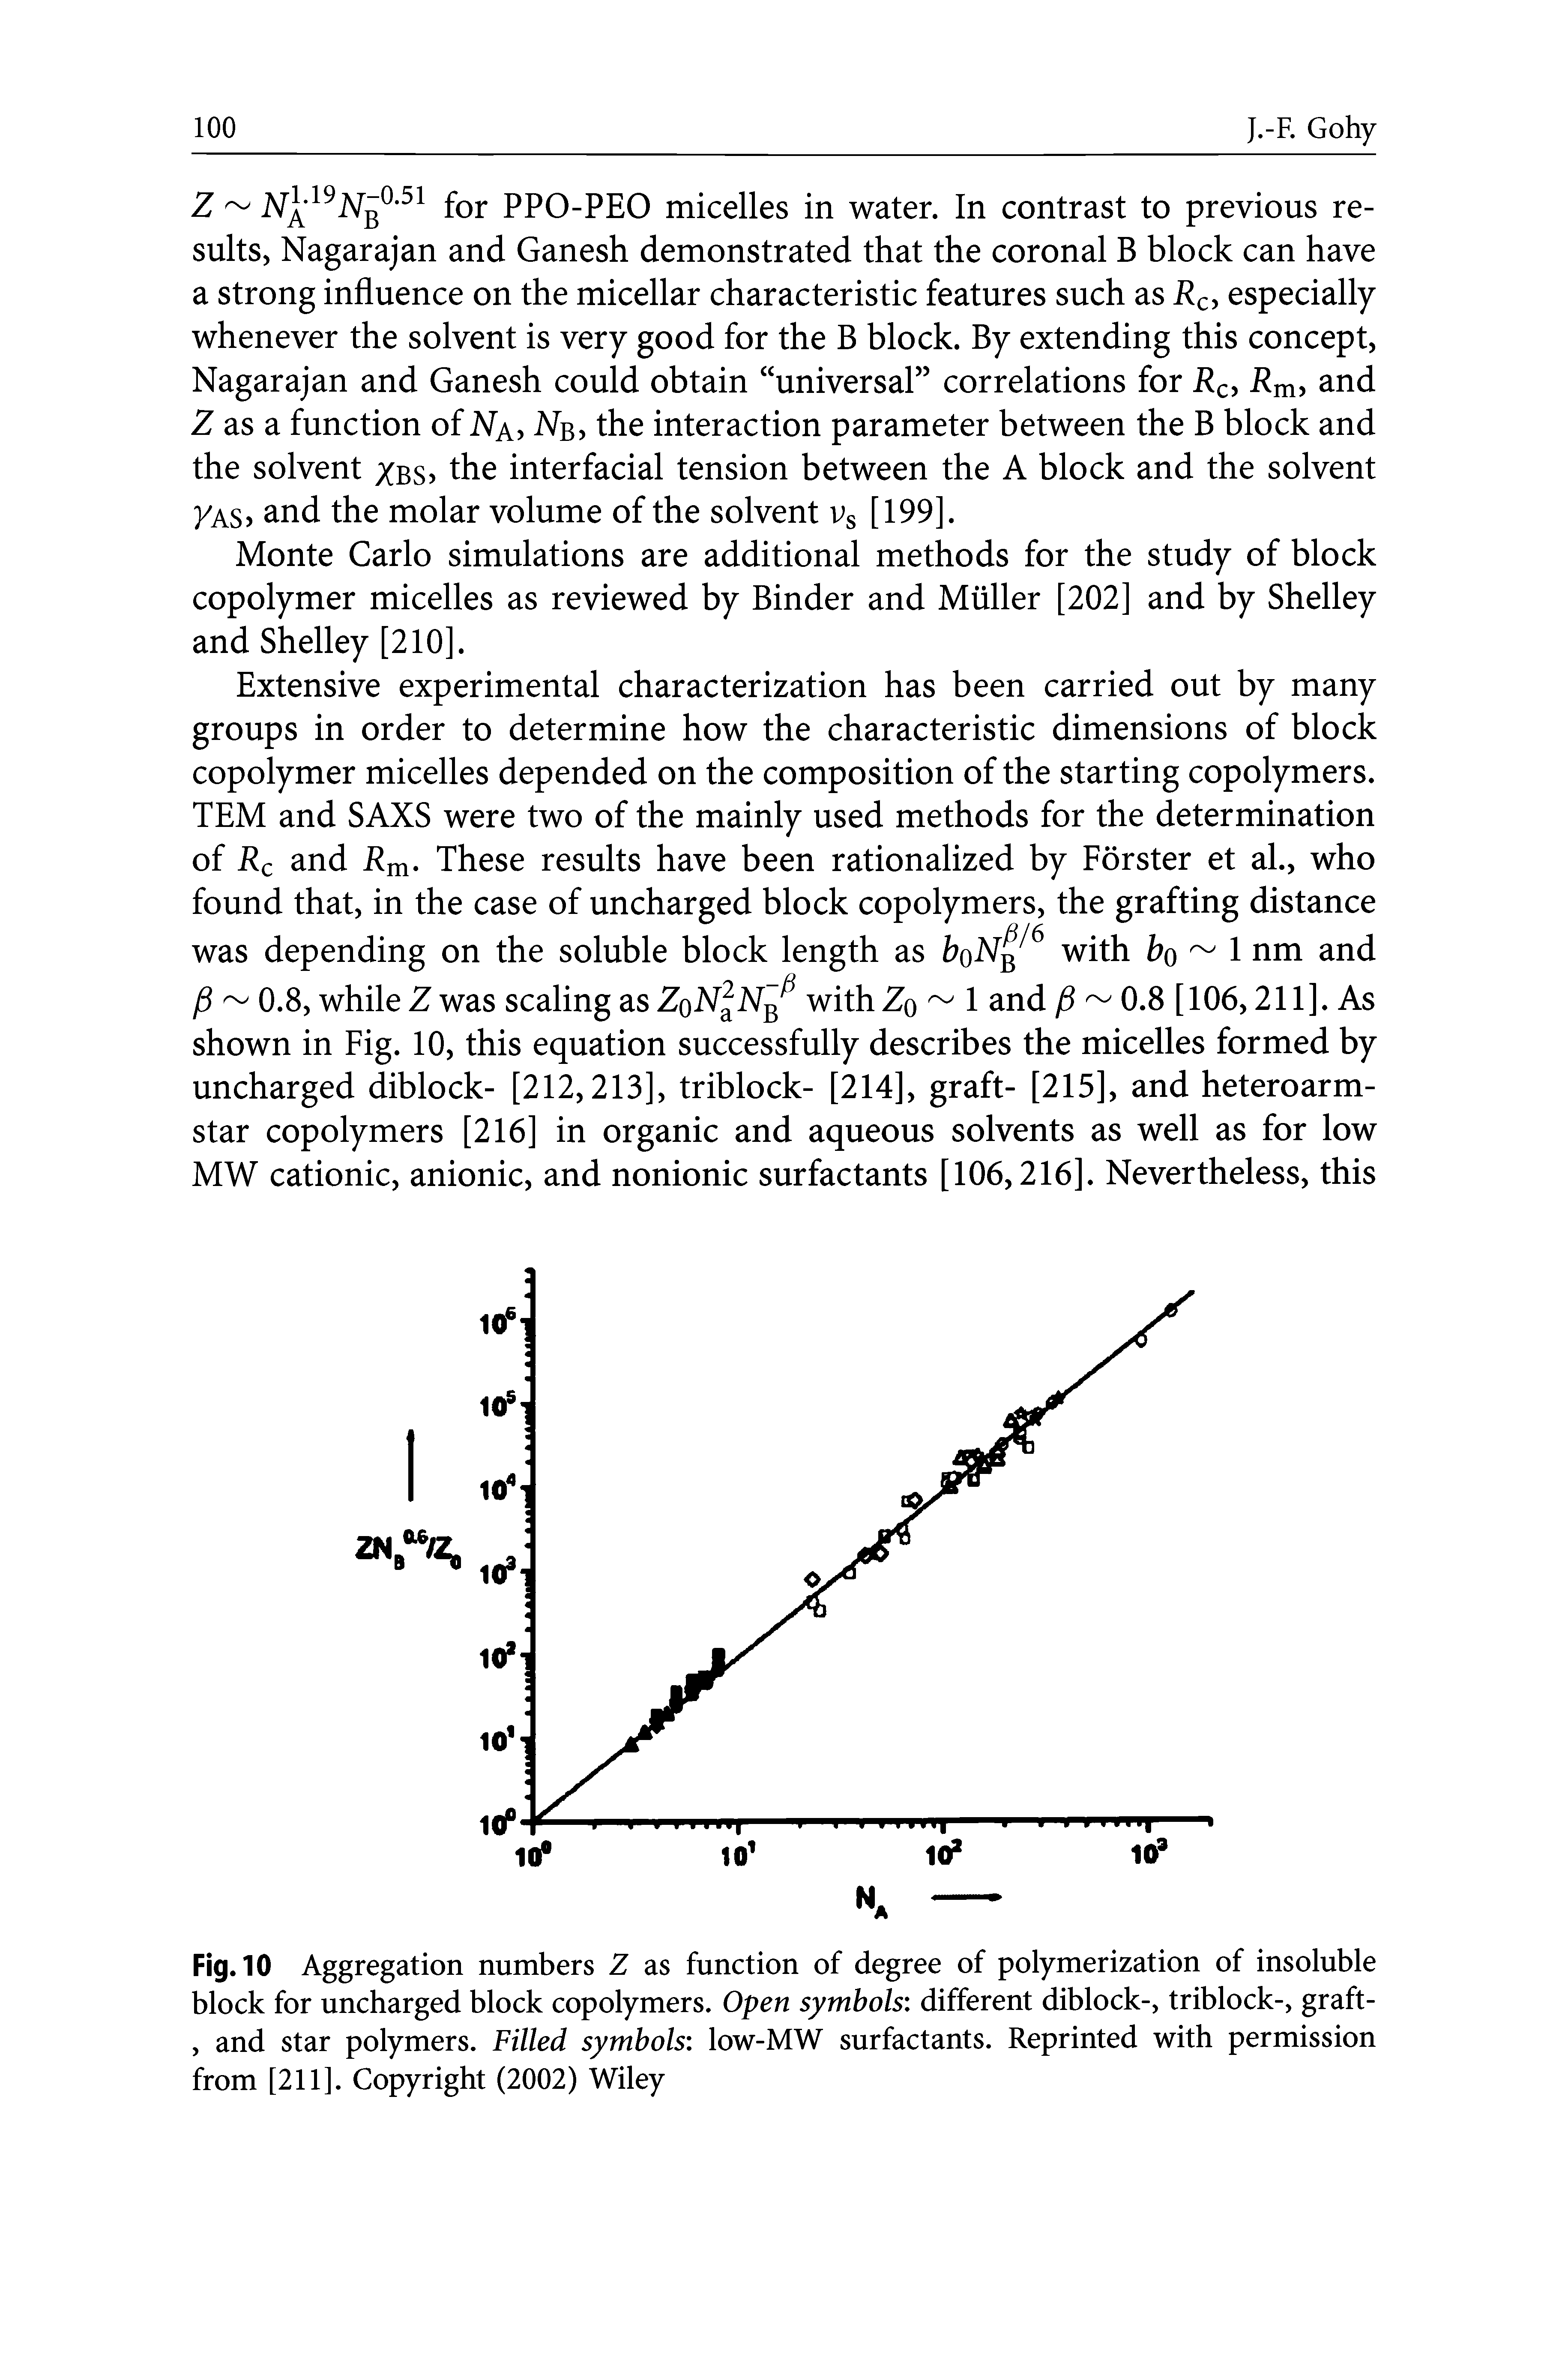 Fig. 10 Aggregation numbers 2 as function of degree of polymerization of insoluble block for uncharged block copolymers. Open symbols different diblock-, triblock-, graft-, and star polymers. Filled symbols low-MW surfactants. Reprinted with permission from [211]. Copyright (2002) Wiley...